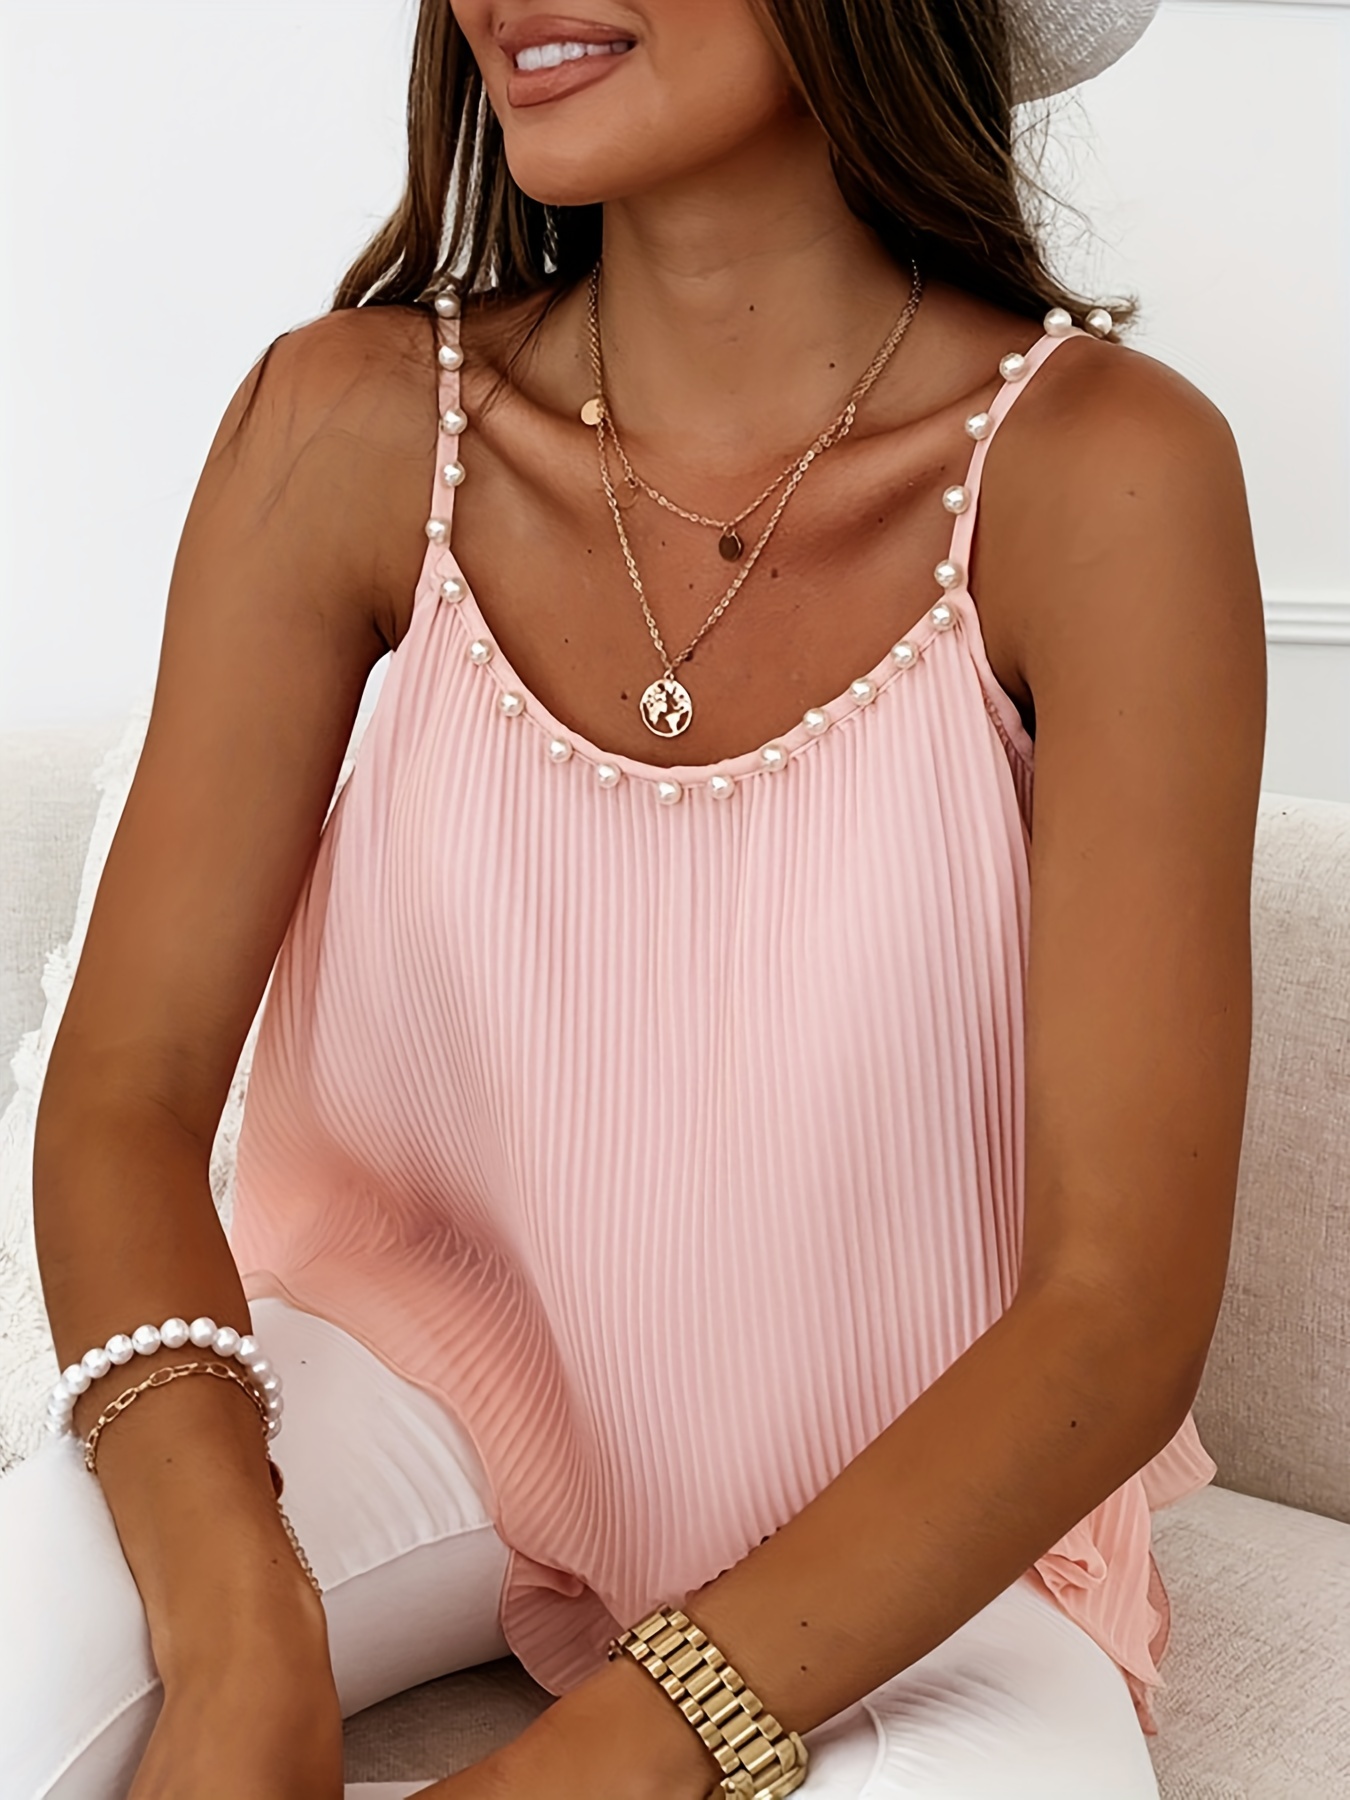 Colorful Striped Knitted Beaded Camisole Cami Top Vintage 90s Style For  Womens Summer Beach Boho, Sexy Sleeveless Spaghetti Strap Crop With Vests  And Suspenders 230508 From Dacai1, $16.05